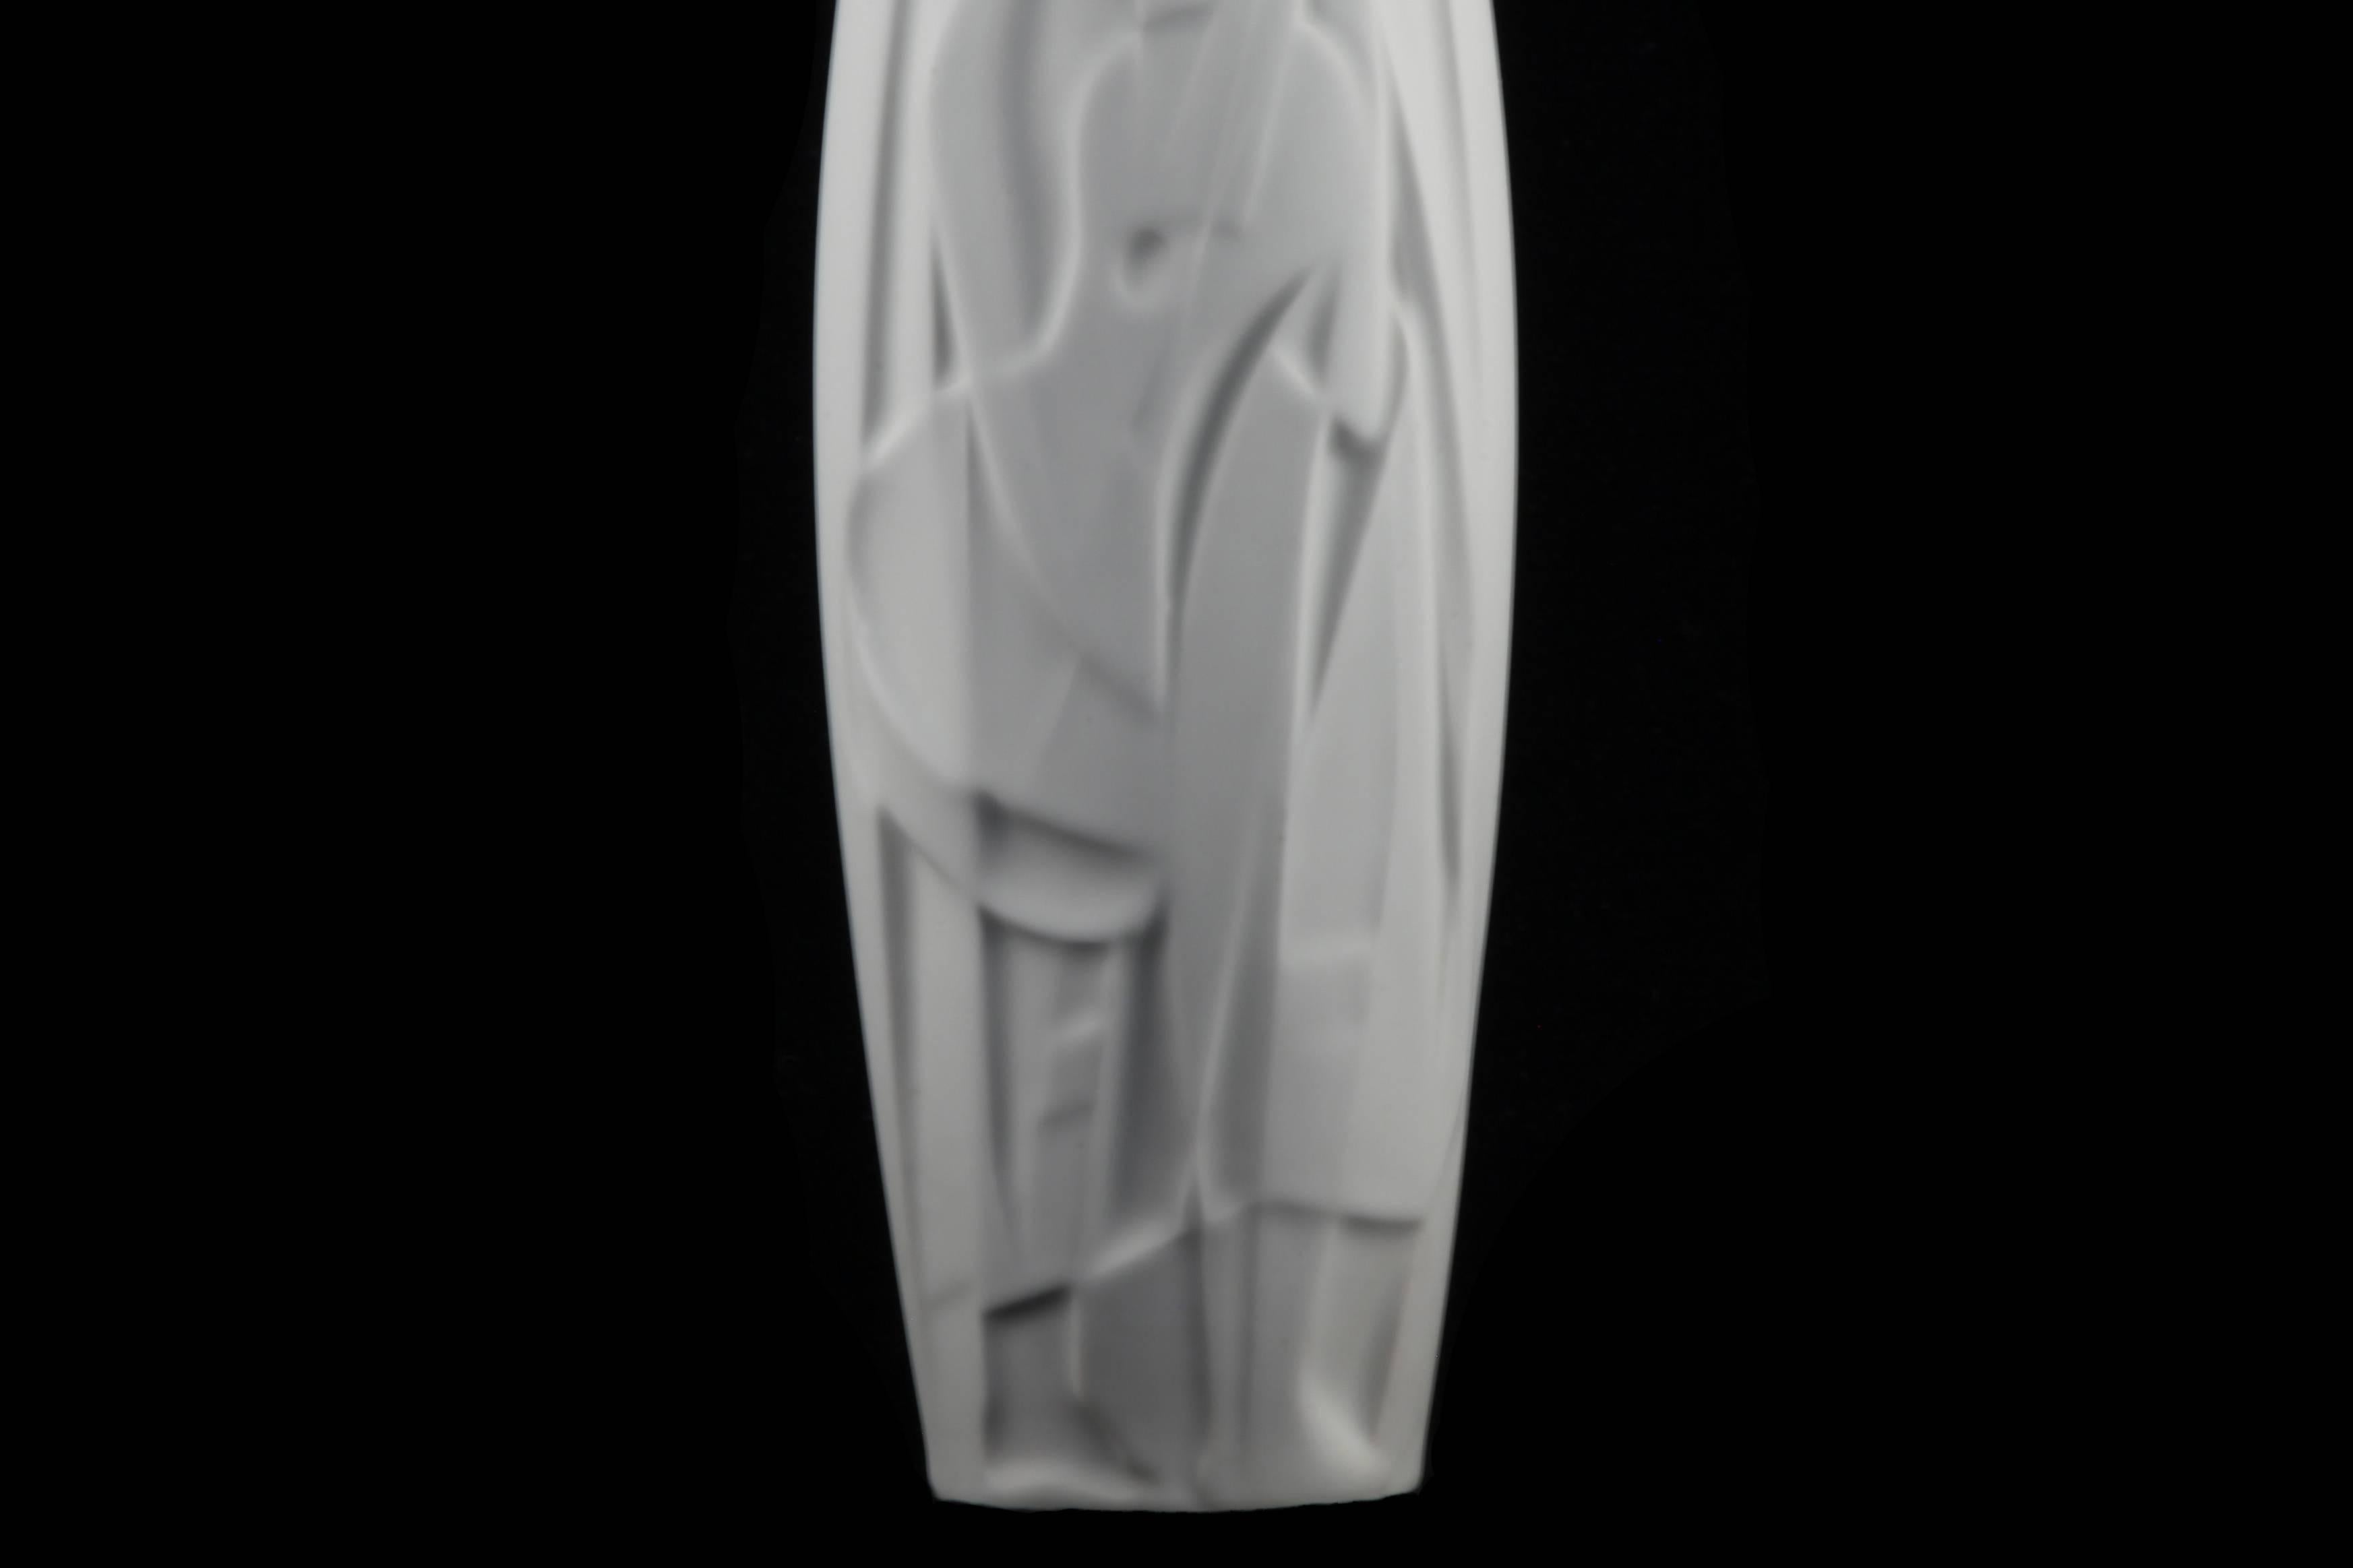 German Porcelain Op Art Vase 'the Lute Player', Cuno Fischer for Rosenthal 7 For Sale 1